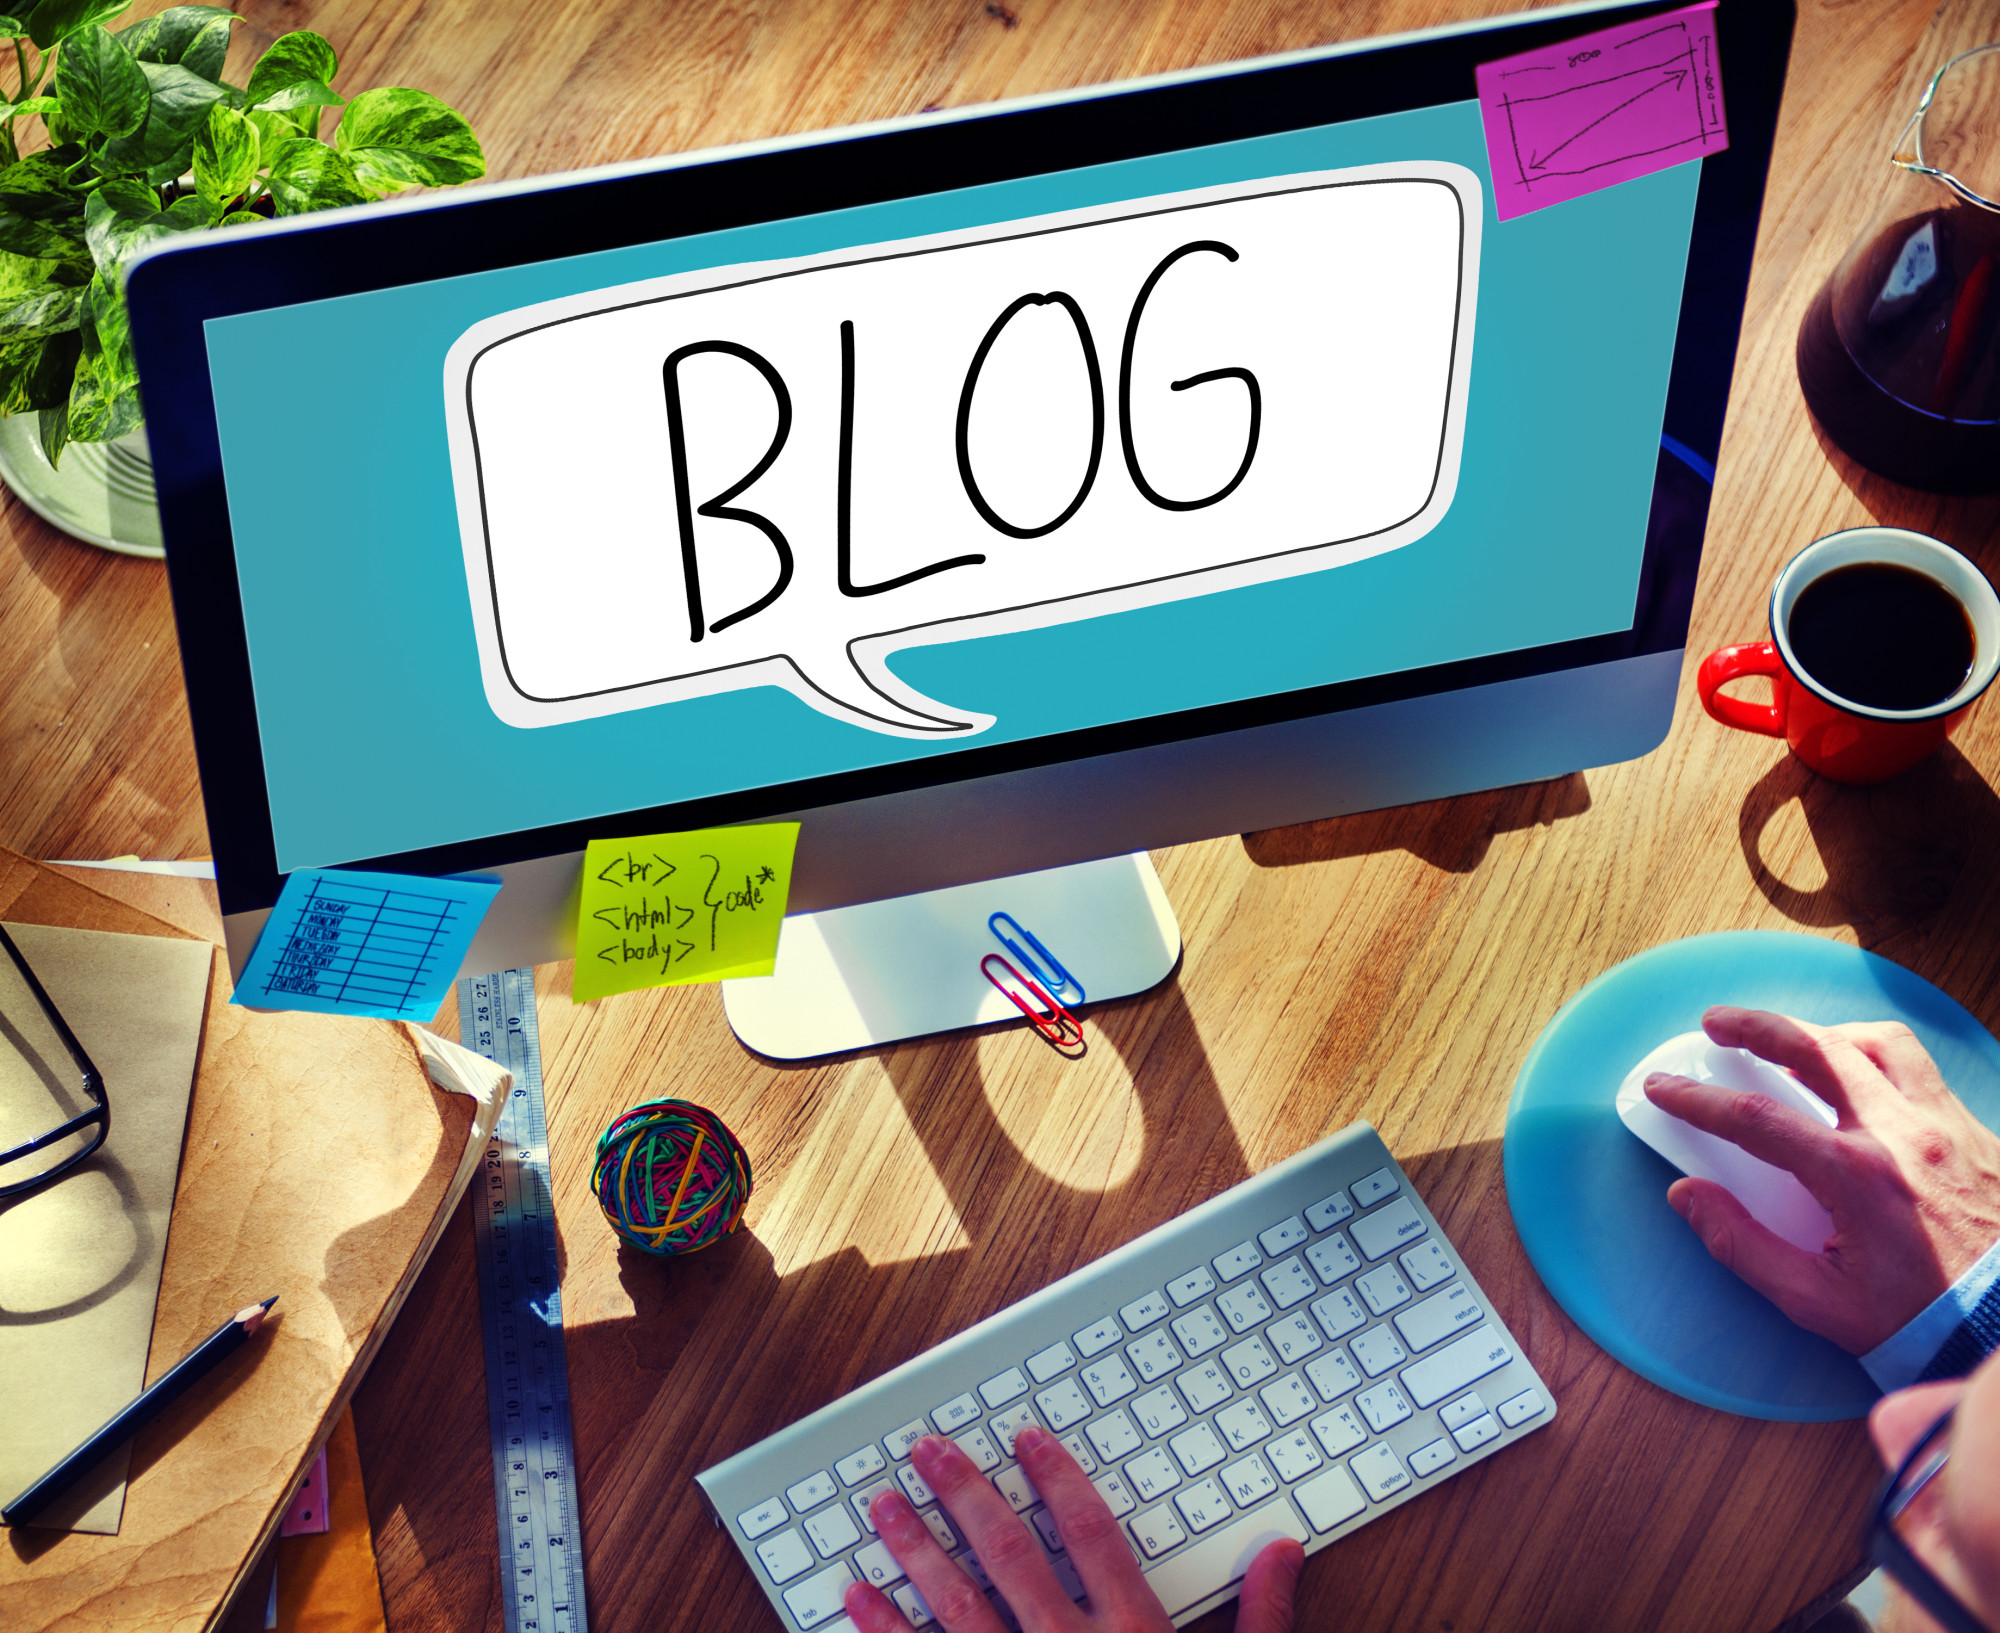 reasons to start a blog